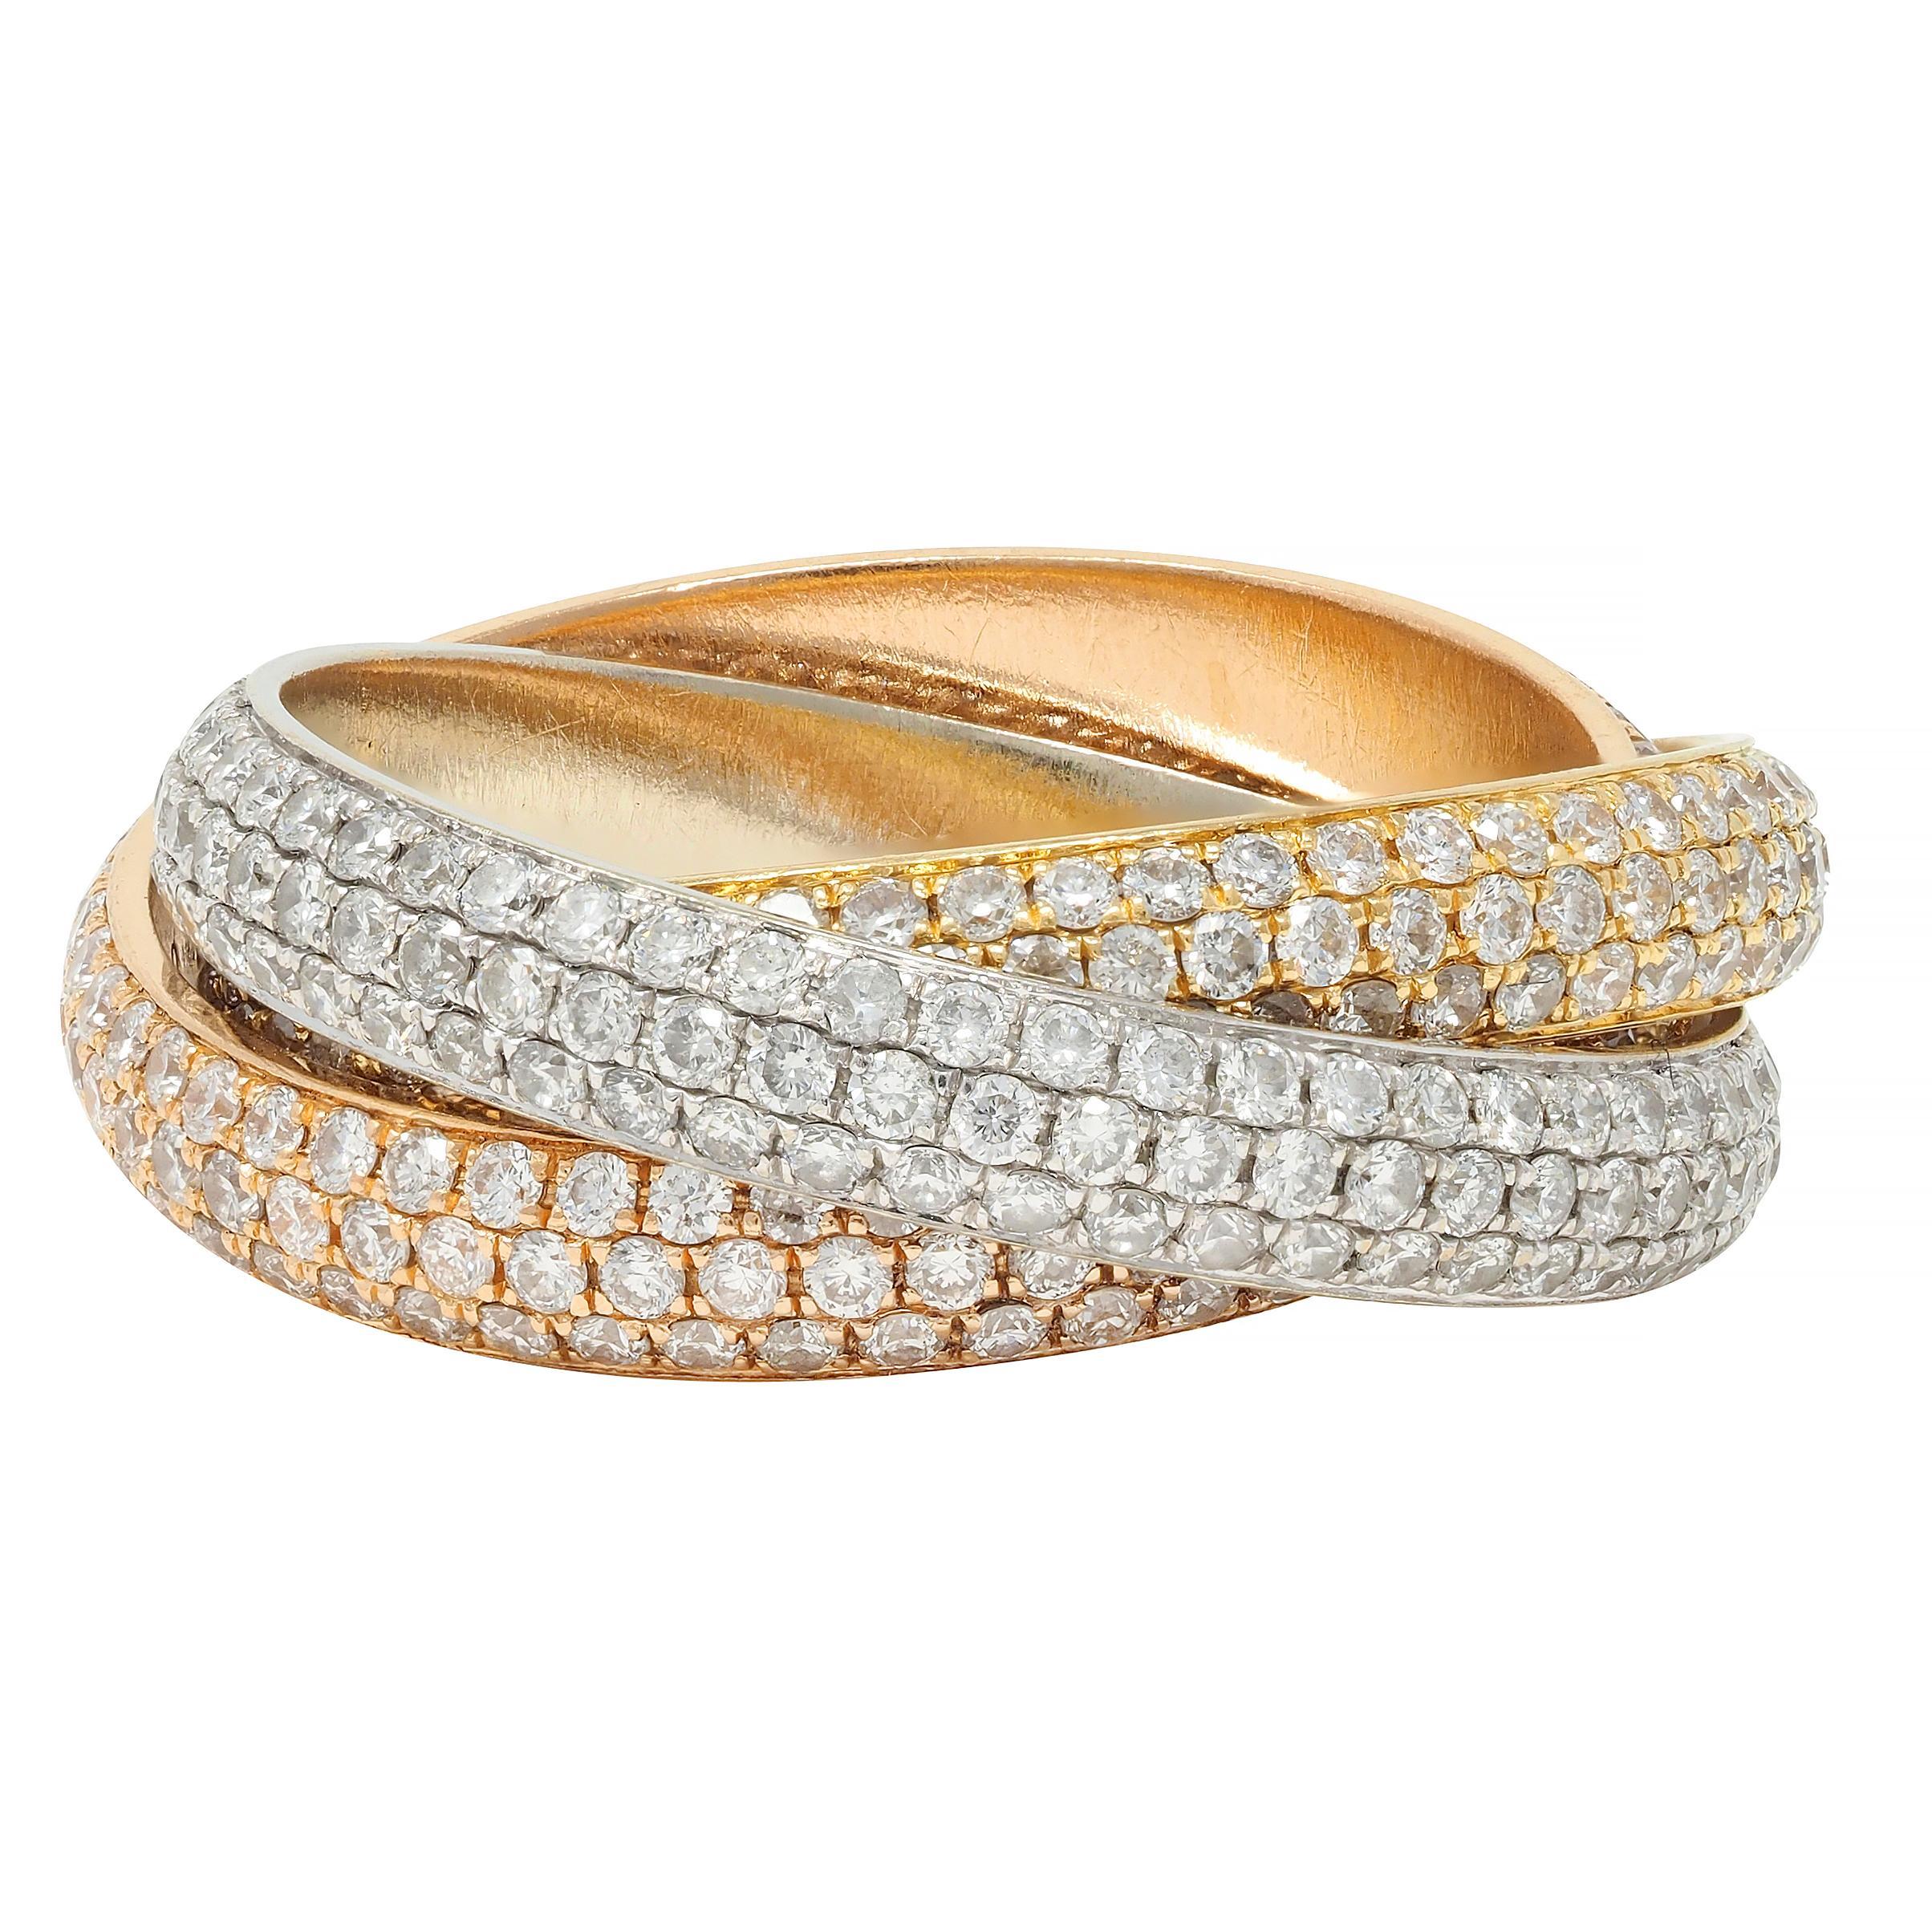 Designed as three interlocked bands of rose, yellow, and white gold
Pavé set throughout with round brilliant cut diamonds 
Weighing approximately 4.50 carats total - G color with VS1 clarity
Bands feature 